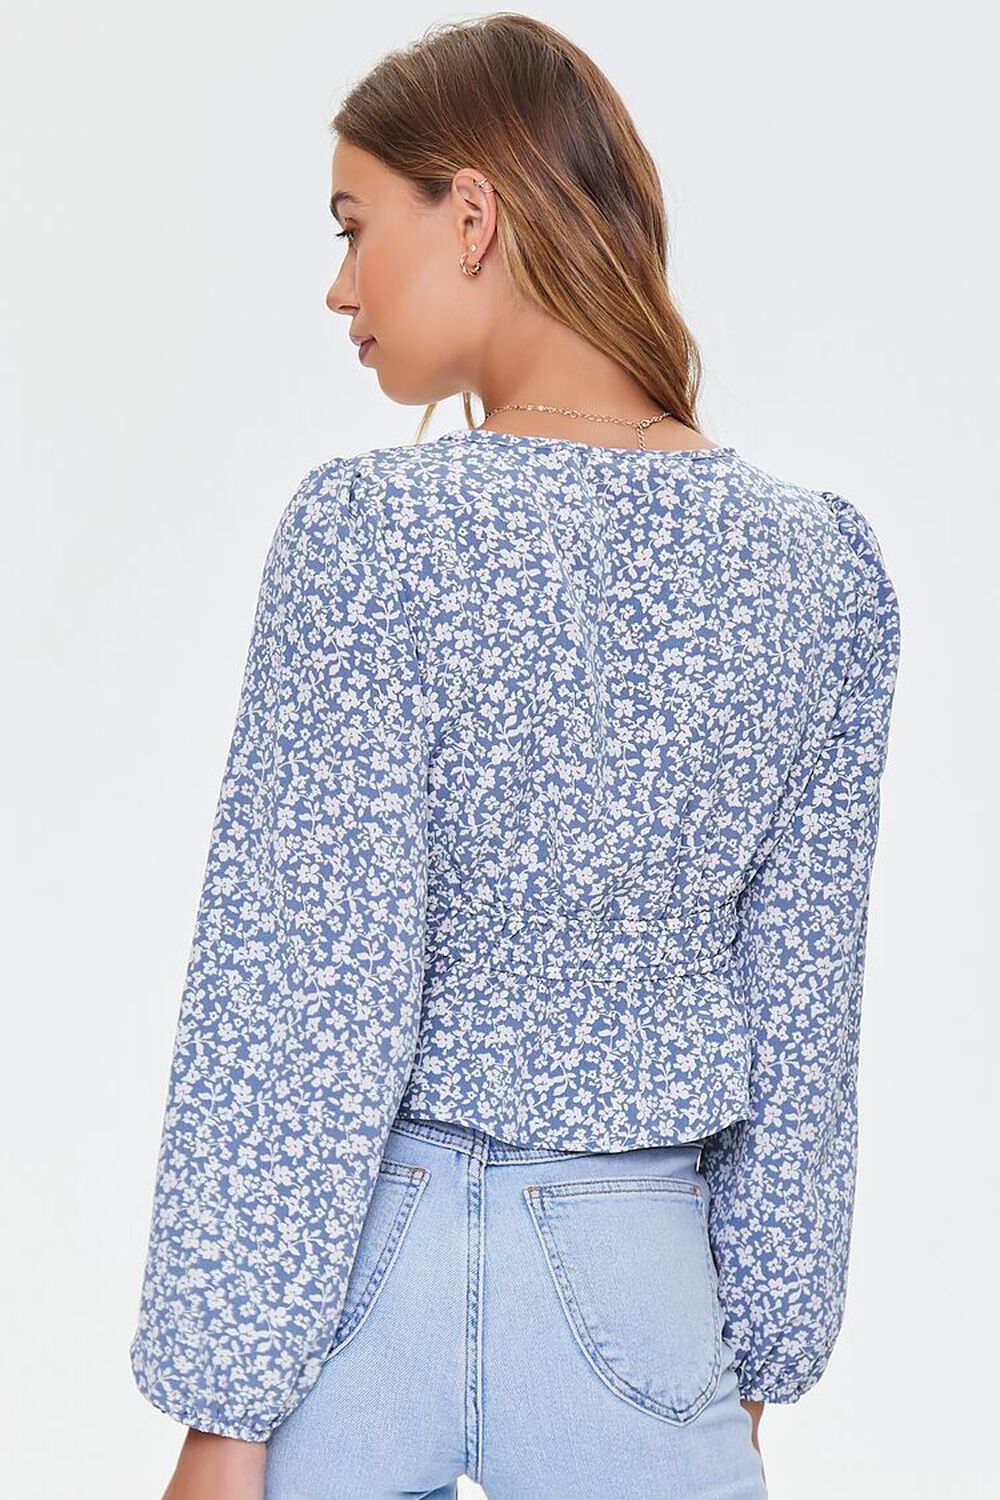 LIGHT BLUE/WHITE Ditsy Floral Print Flounce Top, image 3